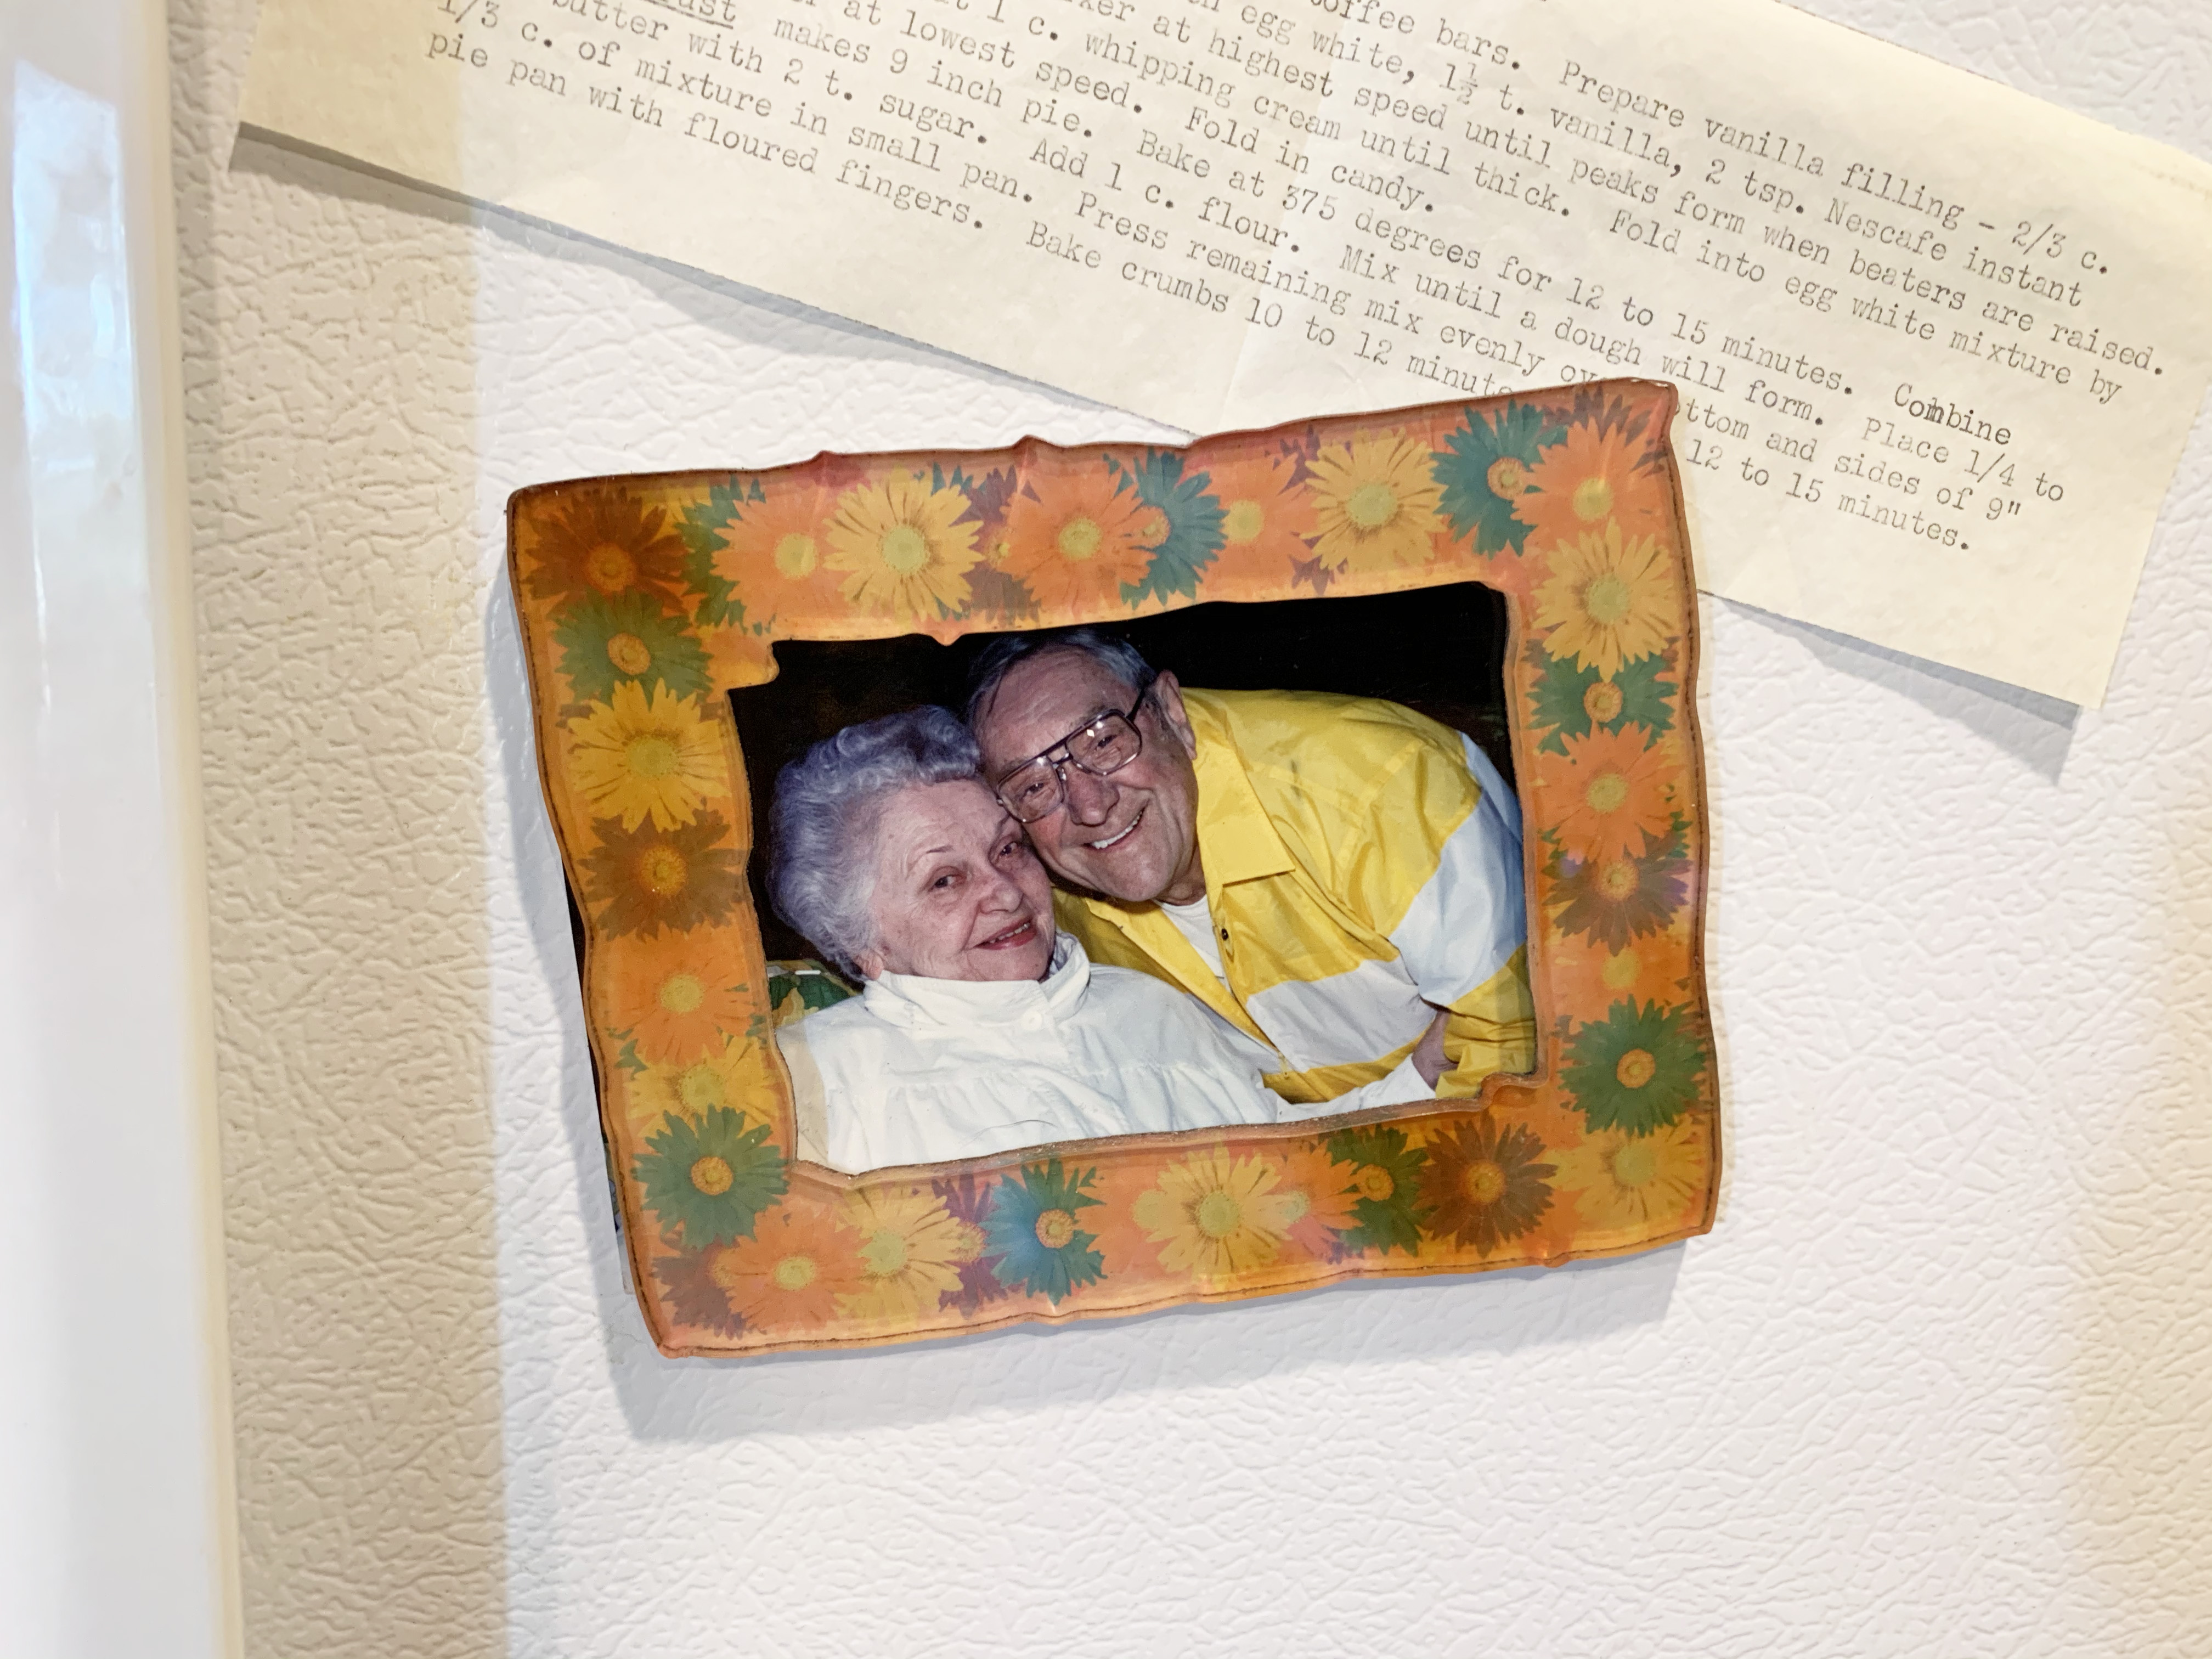 a printed image of grandparents in an orange frame on a fridge with a printed recipe under it